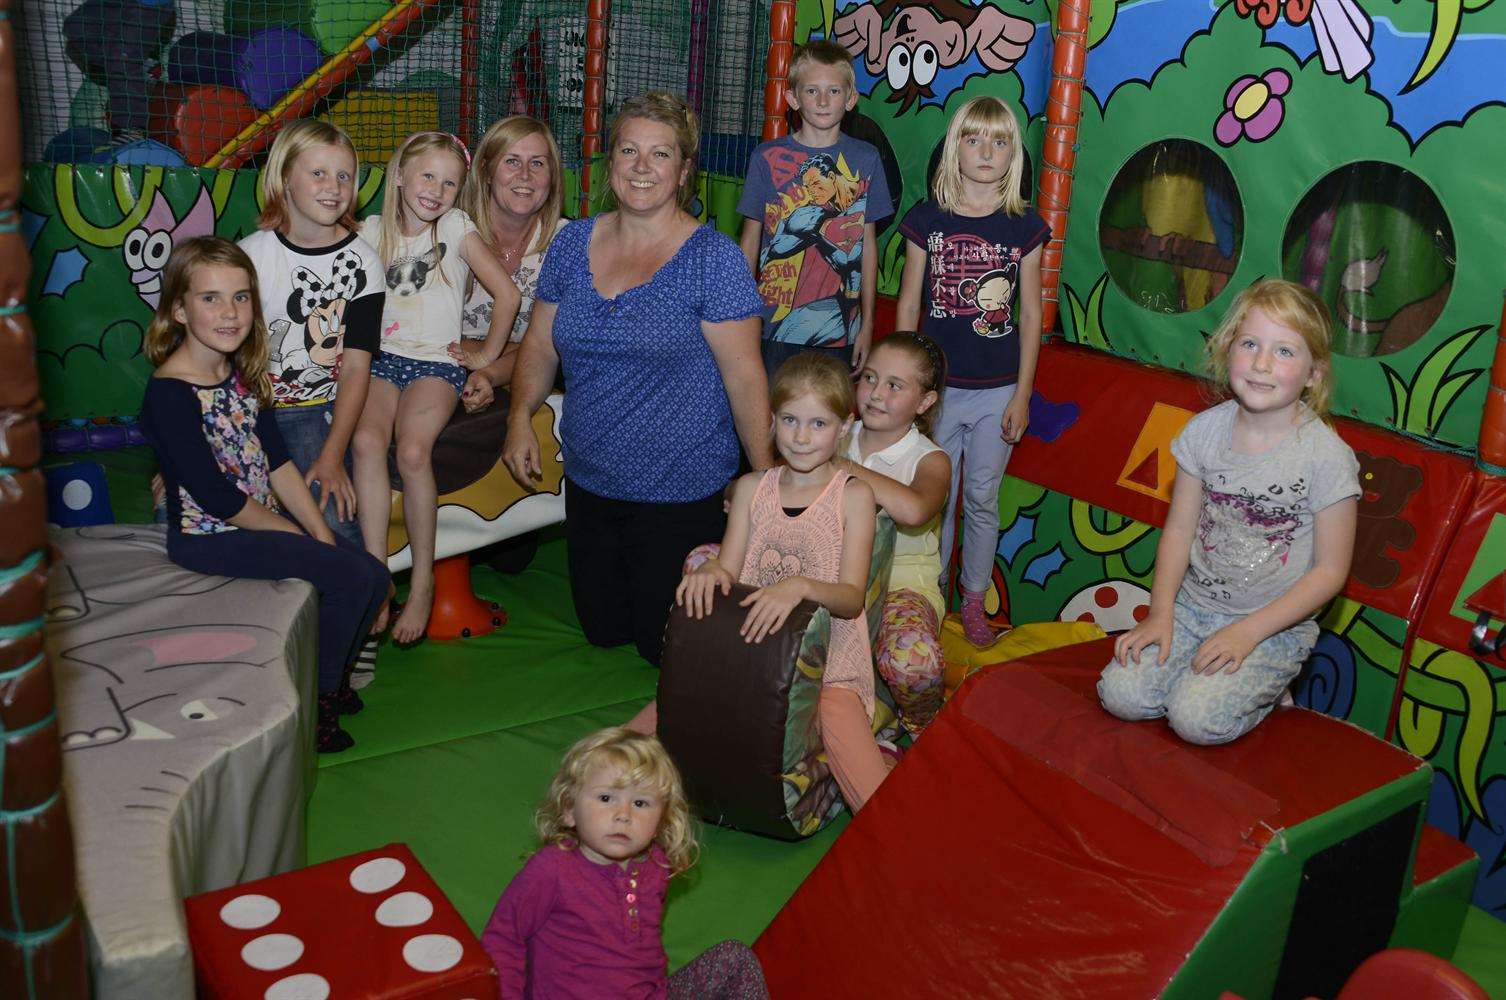 The Fun Factory was popular with Dover families